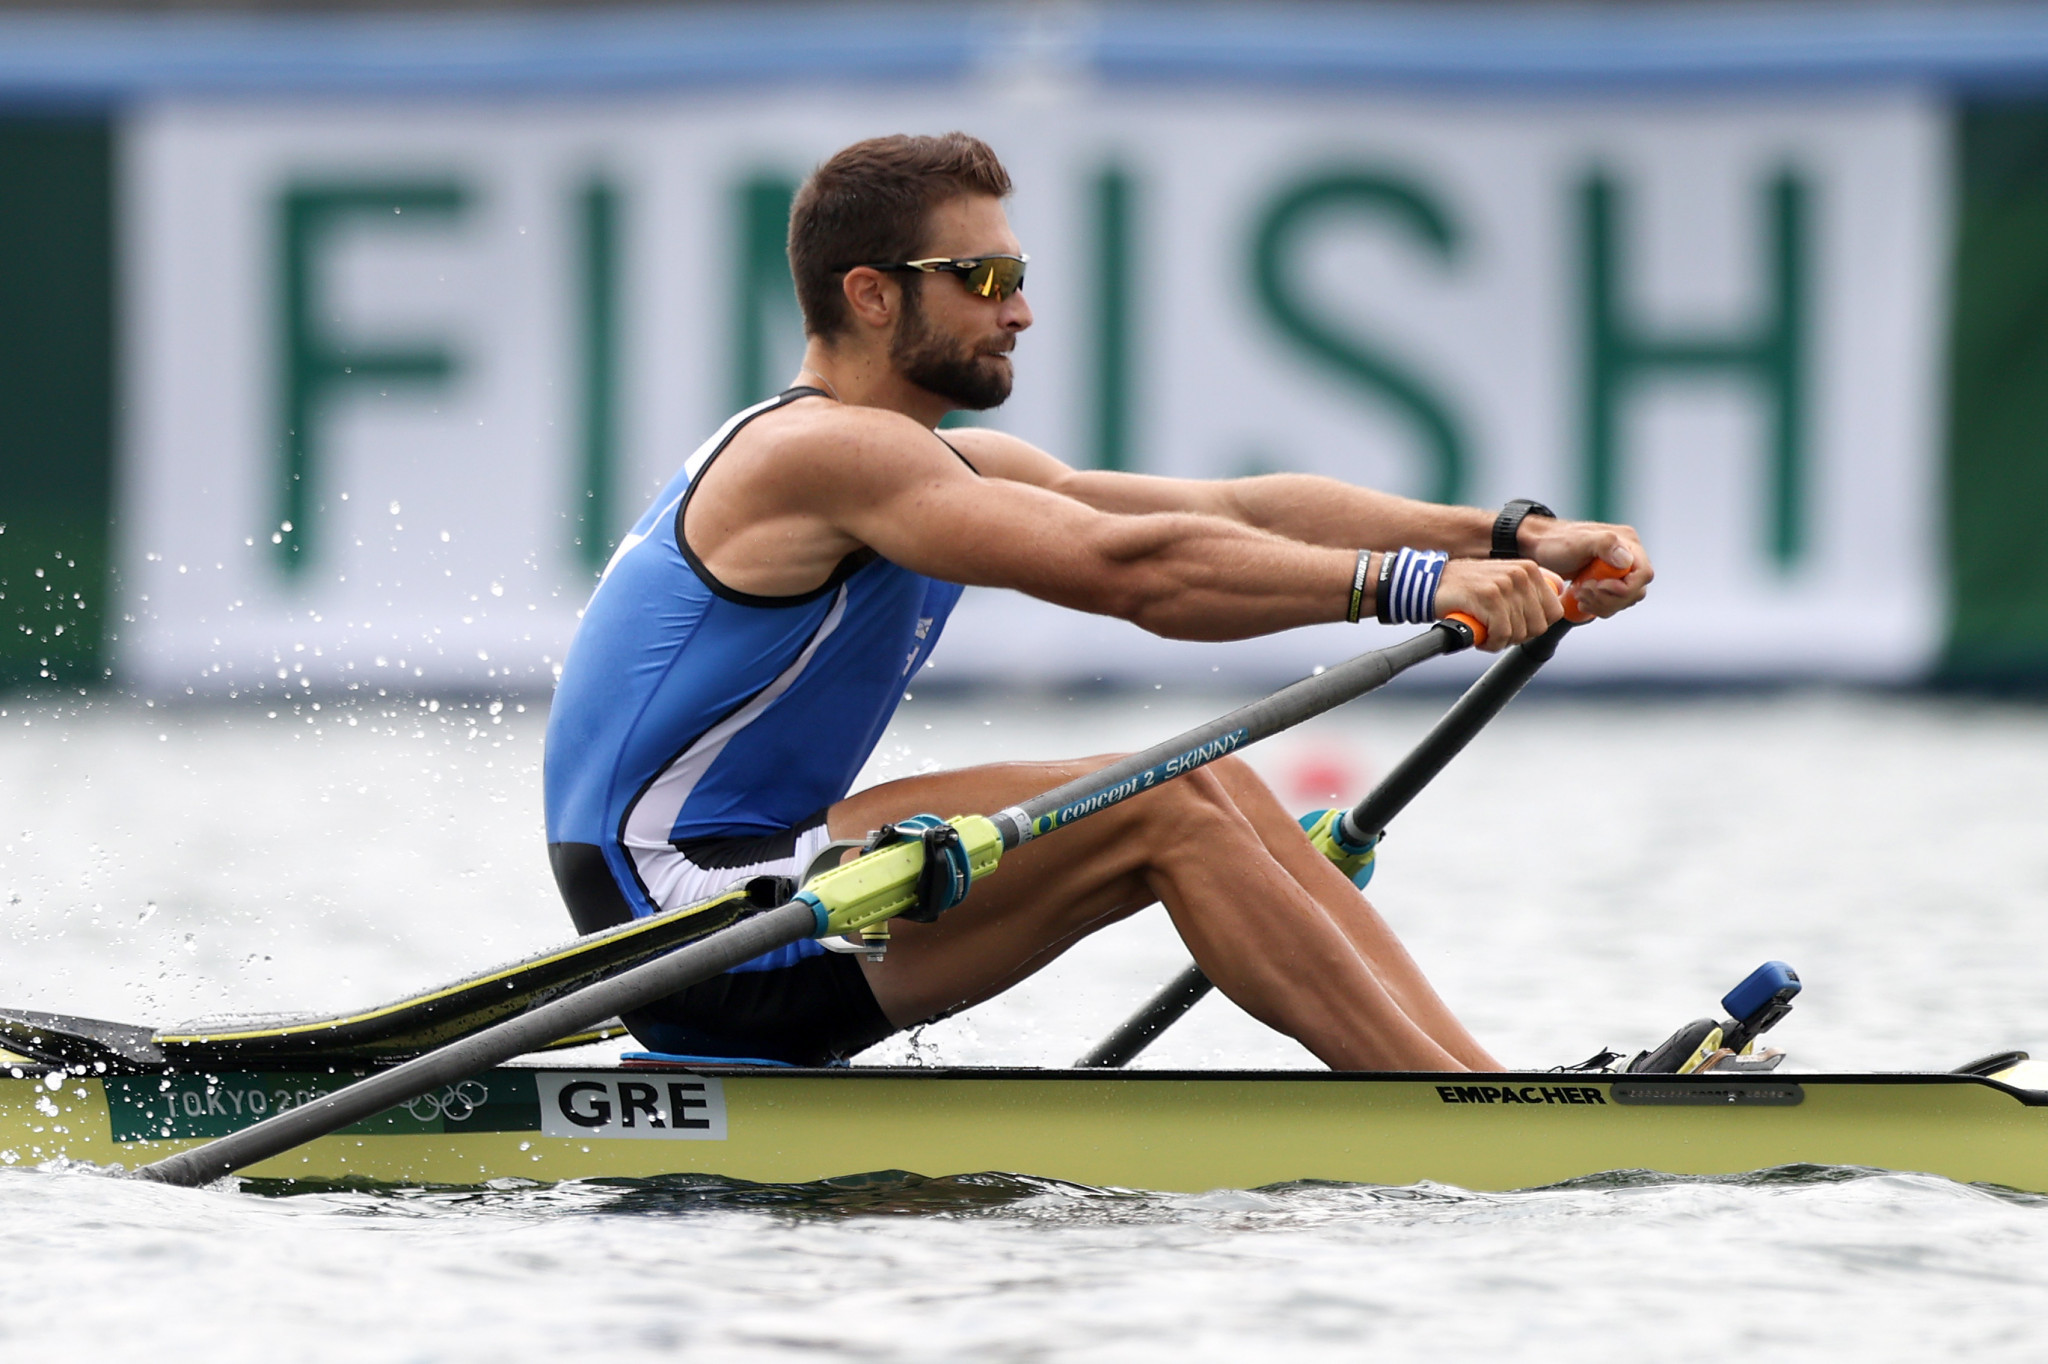 Greece's reigning men's singles sculls Olympic champion Stefanos Ntouskos is set to compete at the first stage of this year's World Rowing Cup in Belgrade ©Getty Images